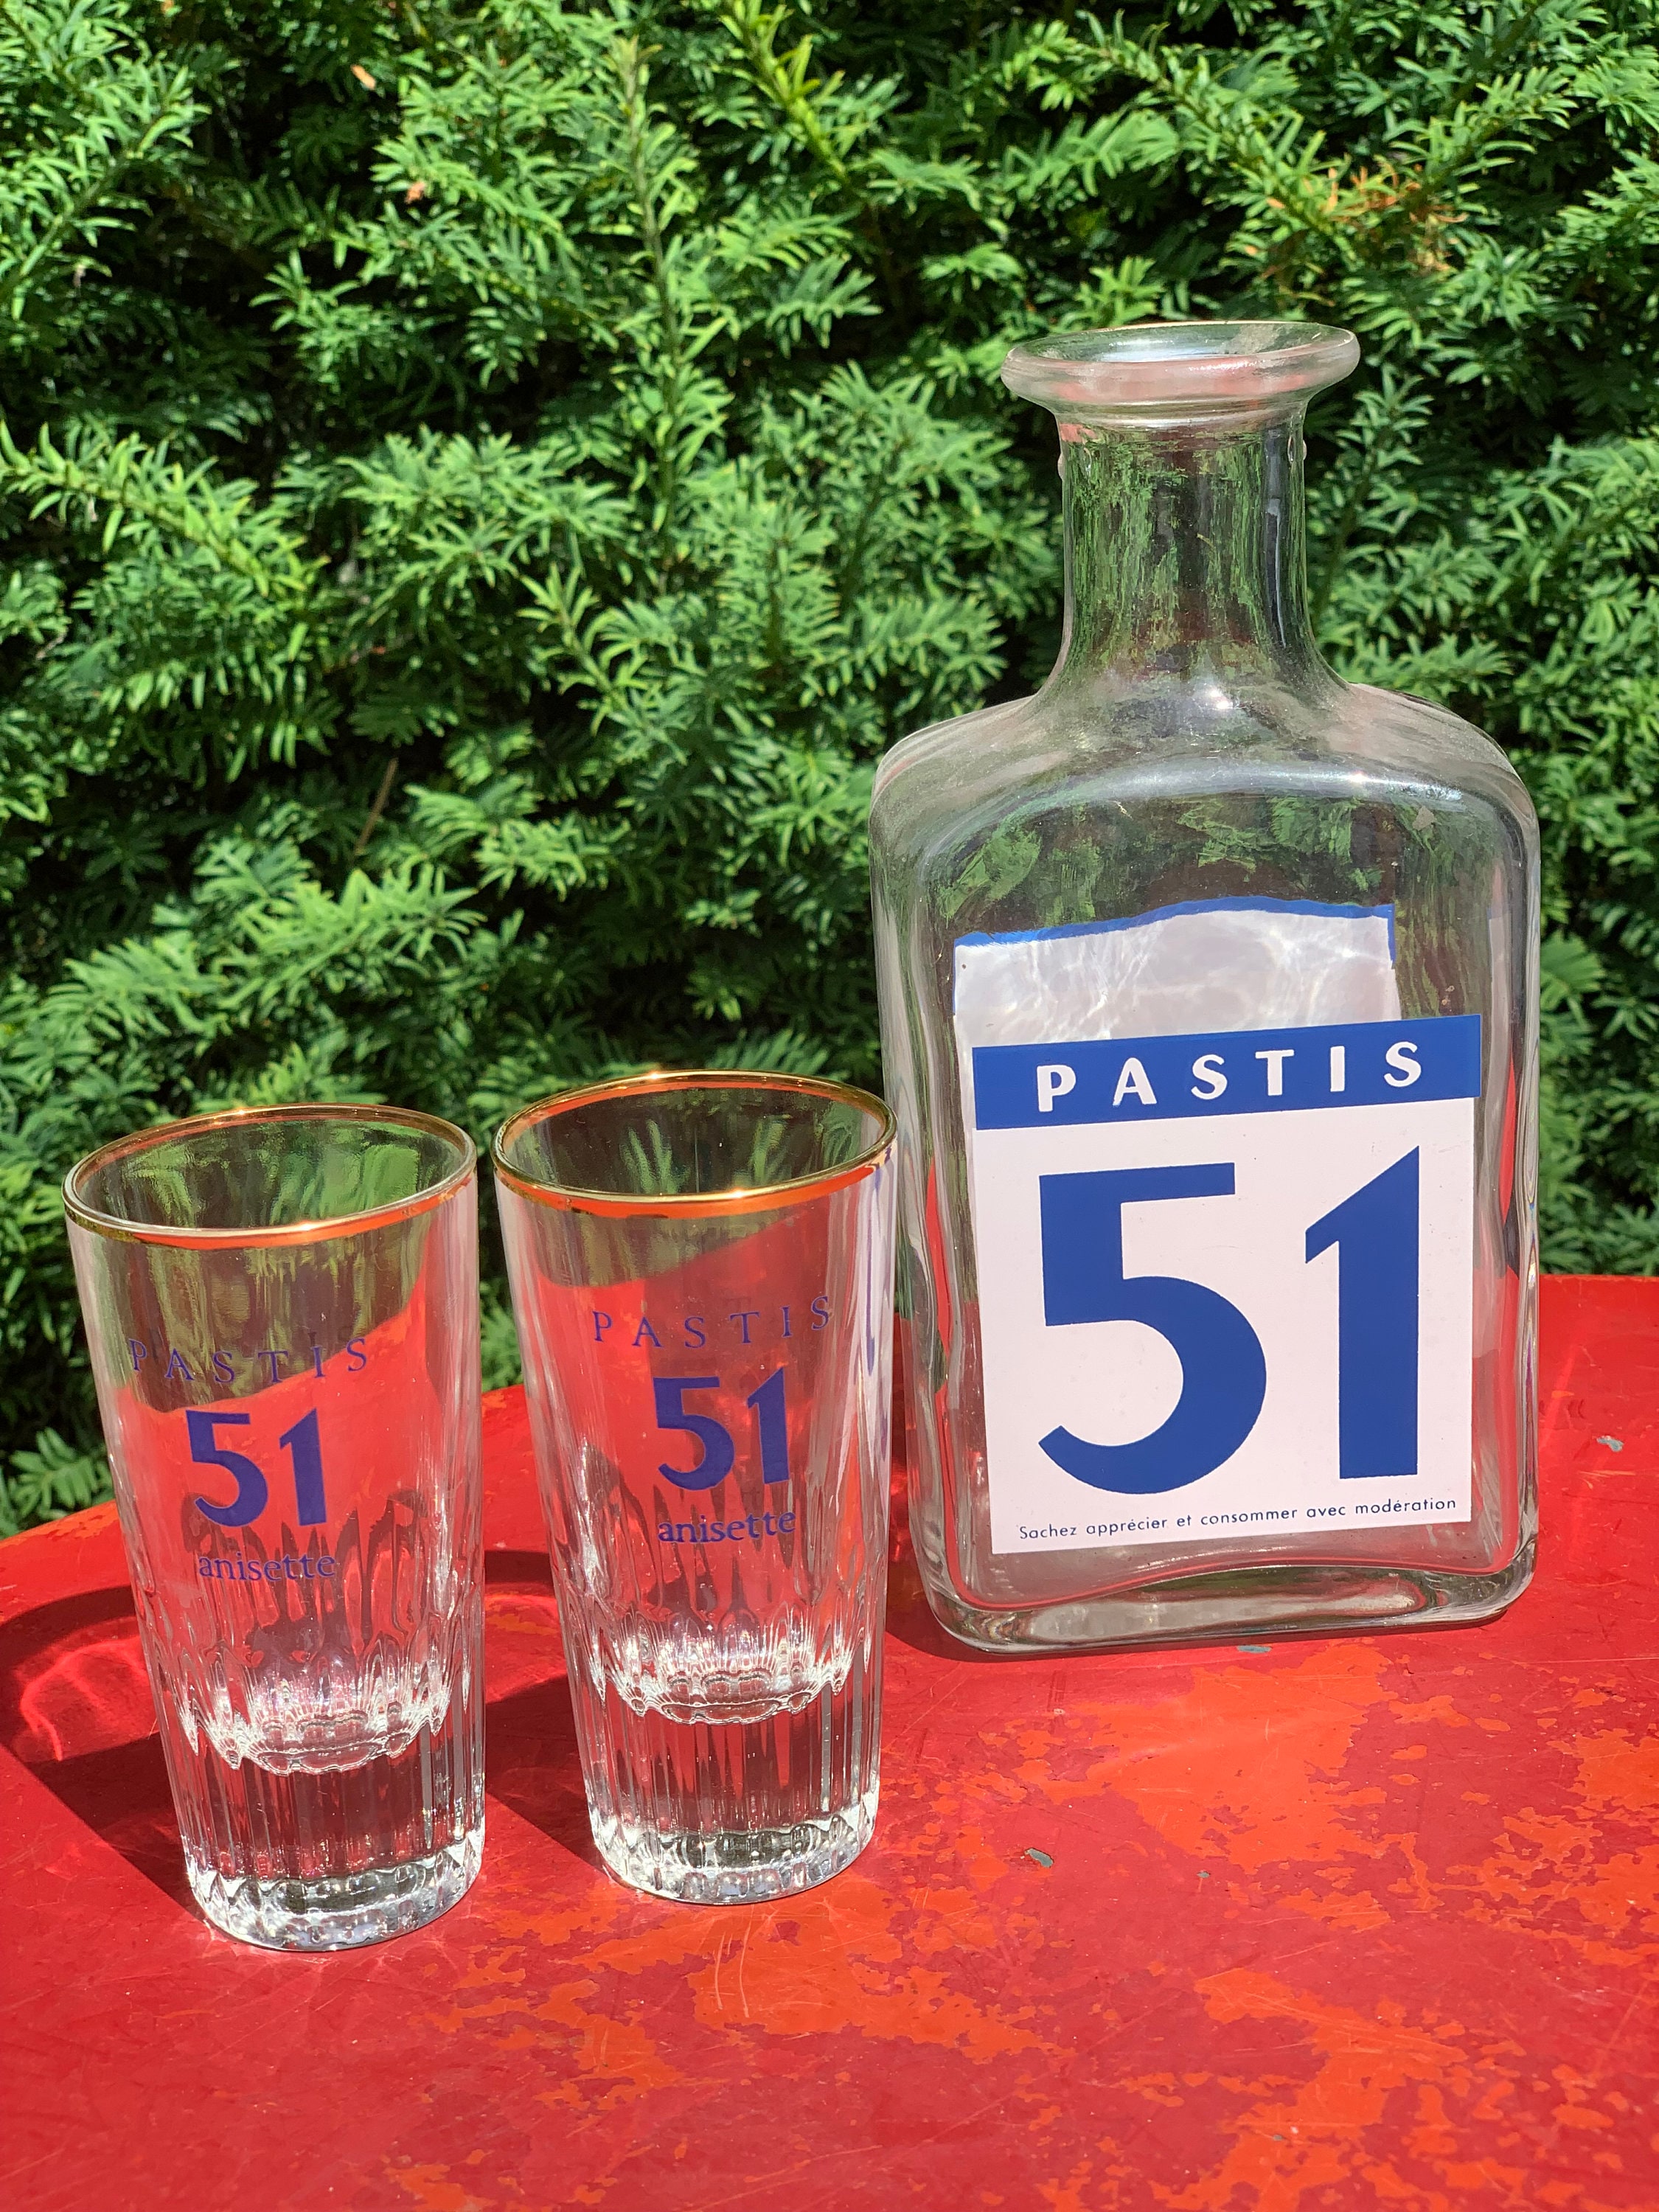 French Vintage 1980s 51 Pastis Water Glass Carafe, Retro Ricard Pernod  Aperitif Drinks Accessory from France, Parisian Flea Market Decor